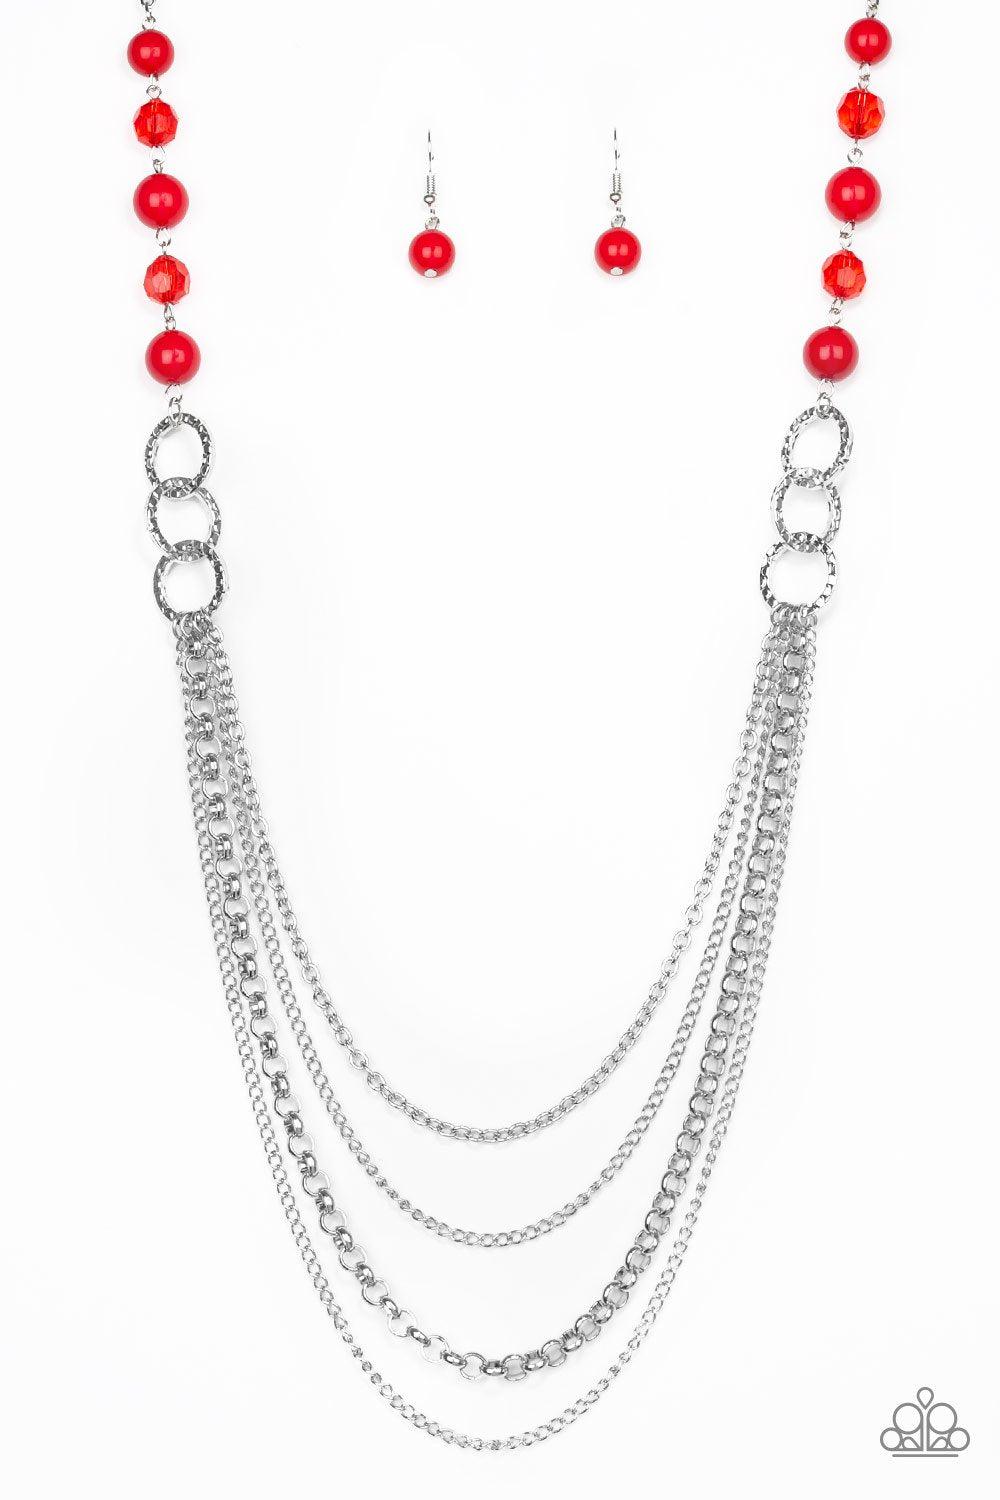 Vividly Vivid Red Necklace - Paparazzi Accessories - lightbox -CarasShop.com - $5 Jewelry by Cara Jewels